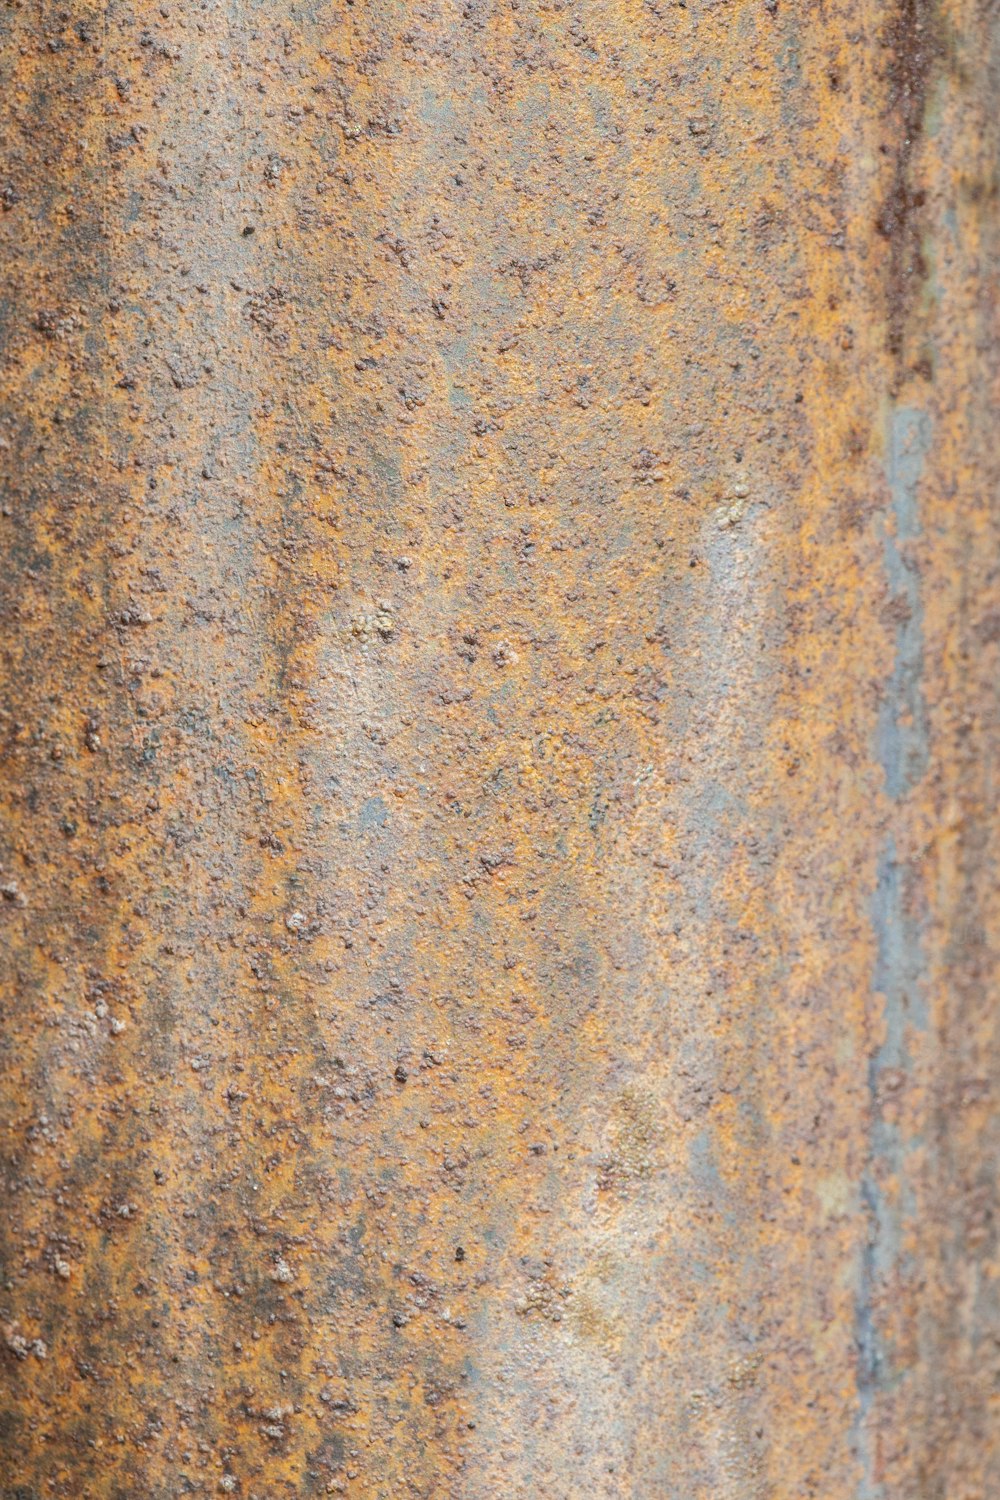 an old rusted metal surface with some rust on it